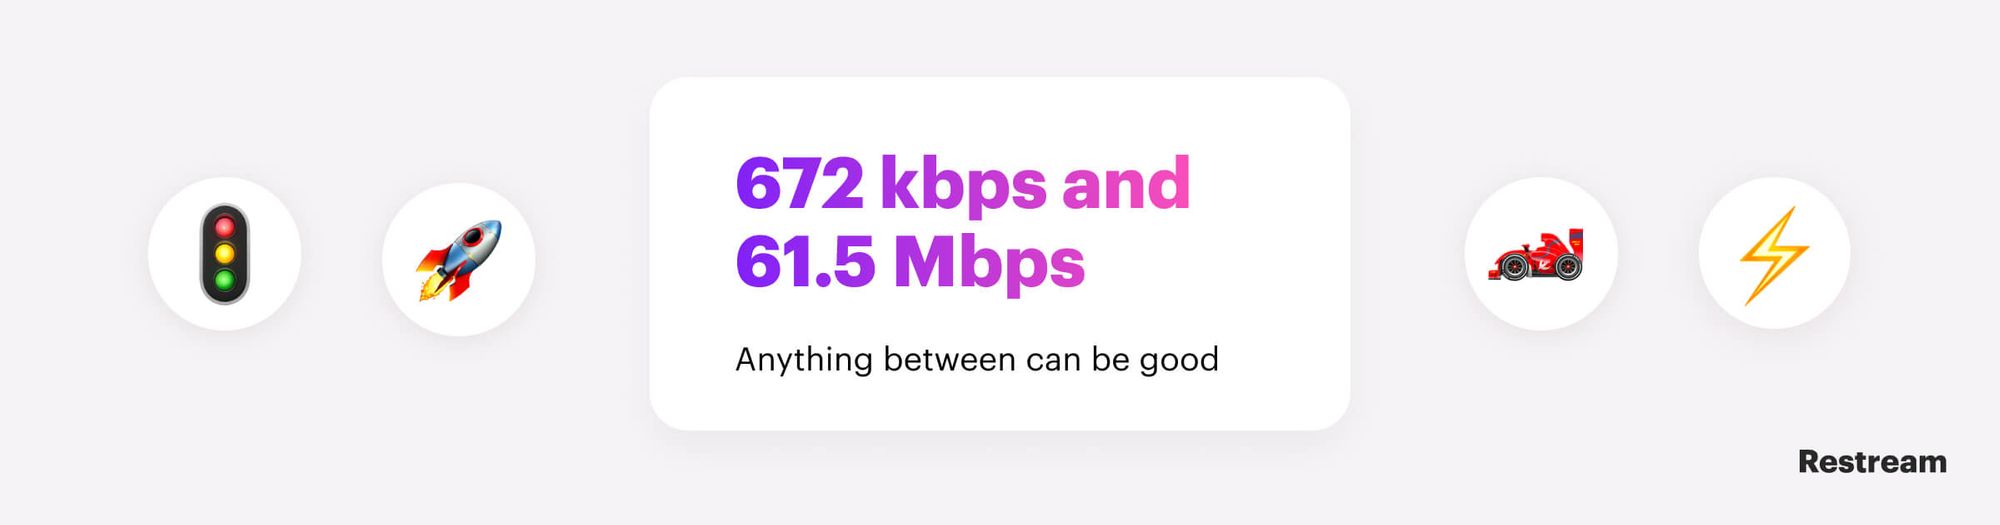 A good upload speed for streaming is between 672 kbps and 61.5 Mbps